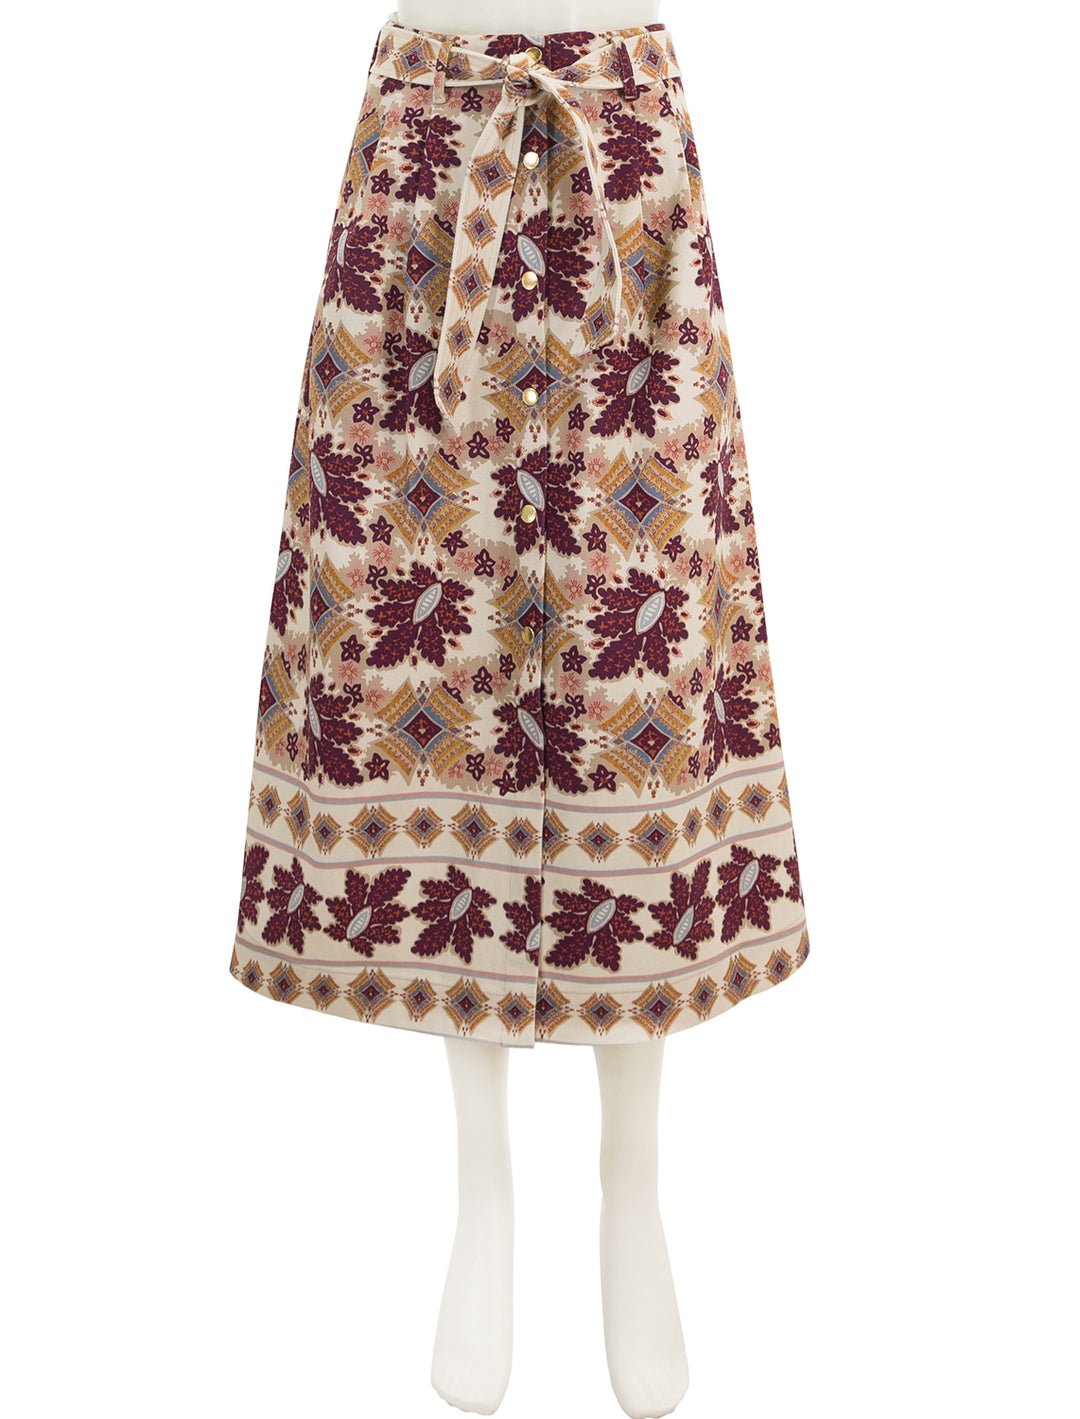 Front view of Cara Cara's oslo skirt in retro floral.